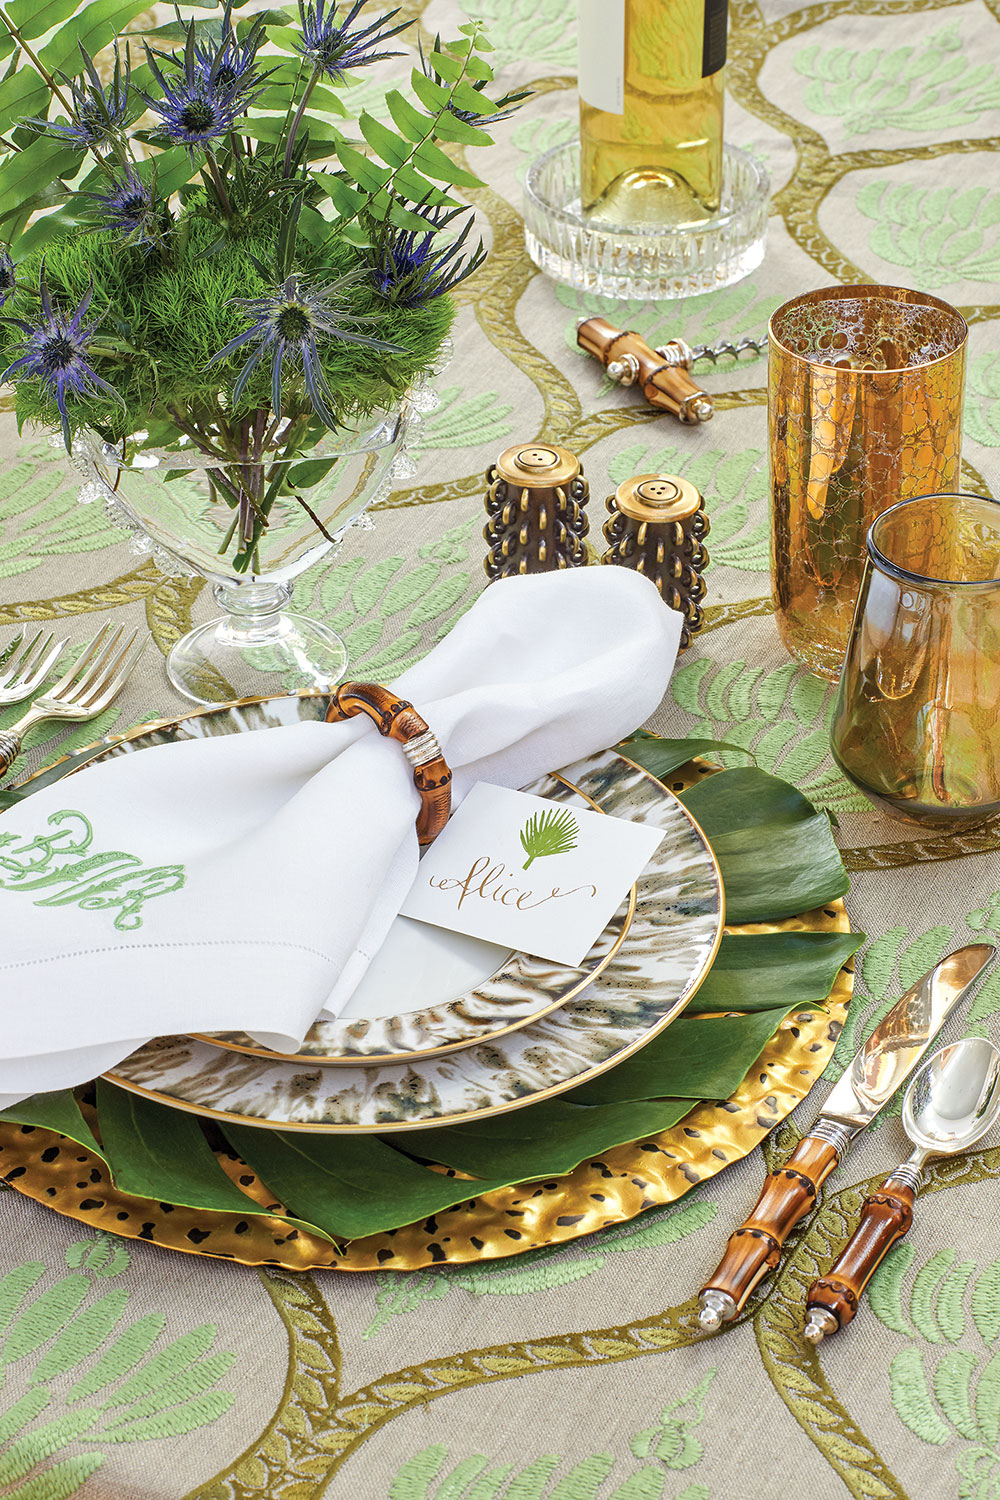 When it’s too hot outside, bring the tropics to your table by mixing hues of sunshine gold with cool, leafy greens and natural bamboo